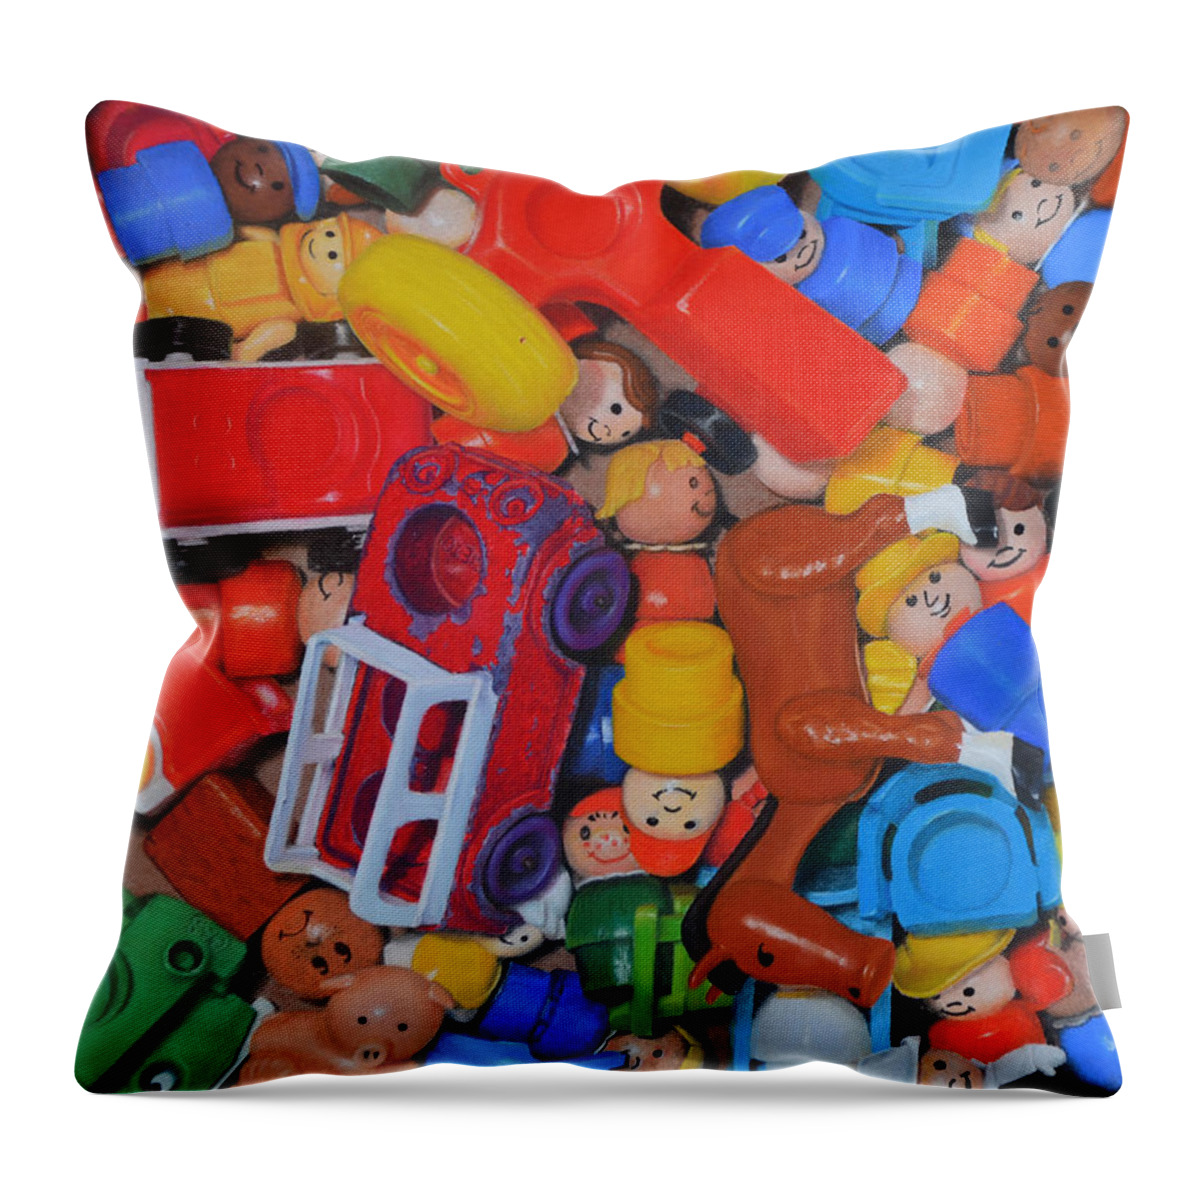 Toy Throw Pillow featuring the painting Little Peoples by Joanne Grant